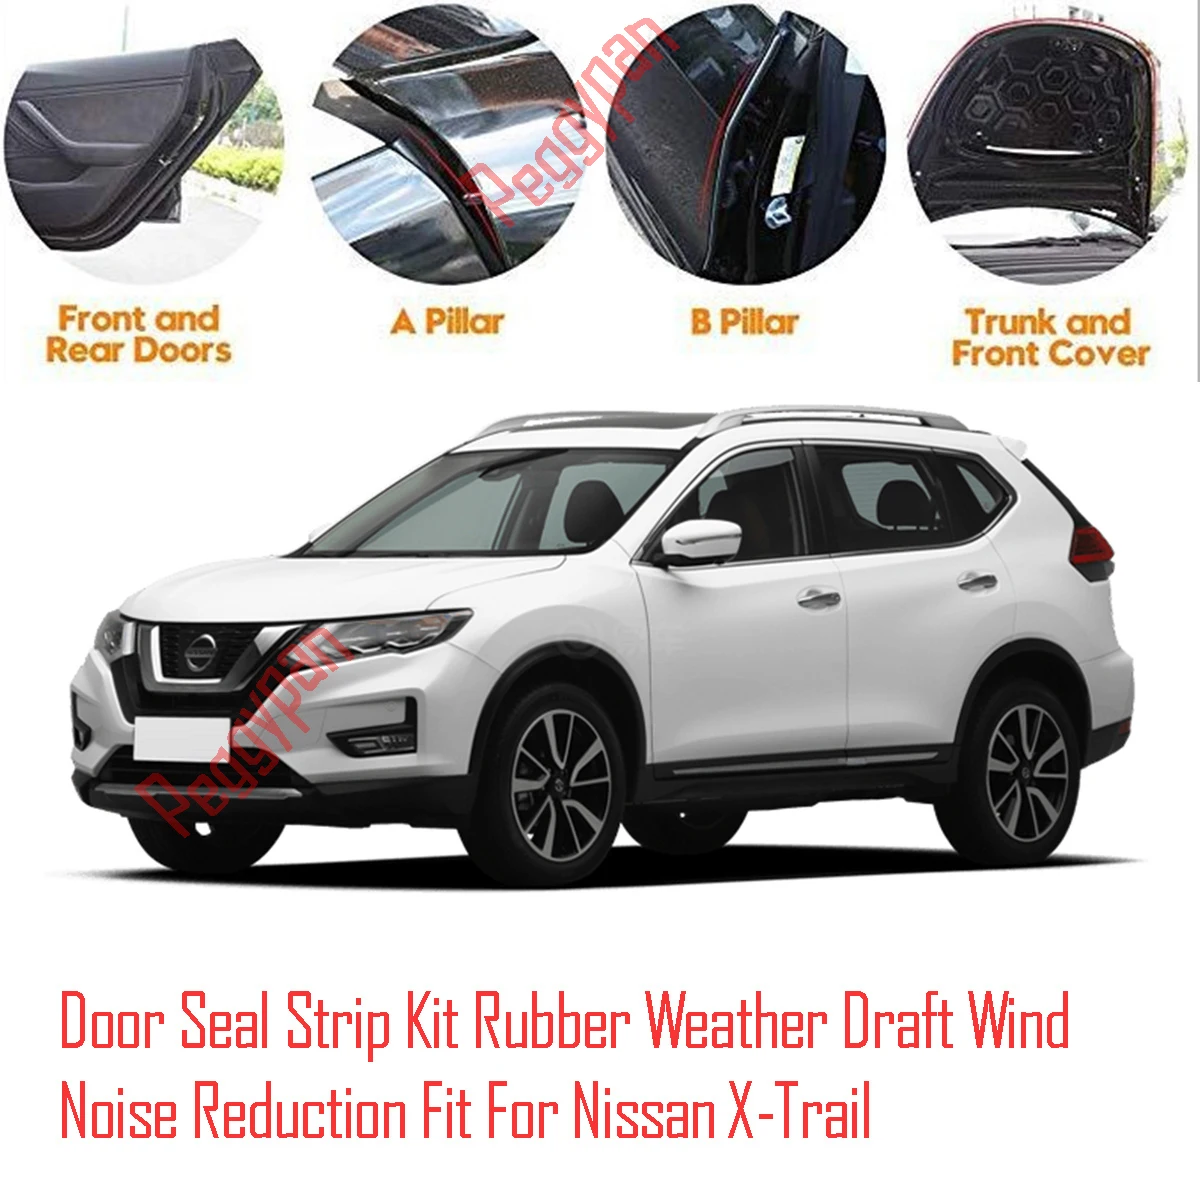 Door Seal Strip Kit Self Adhesive Window Engine Cover Soundproof Rubber Weather Draft Wind Noise Reduction Fit For Nissan X-Trai